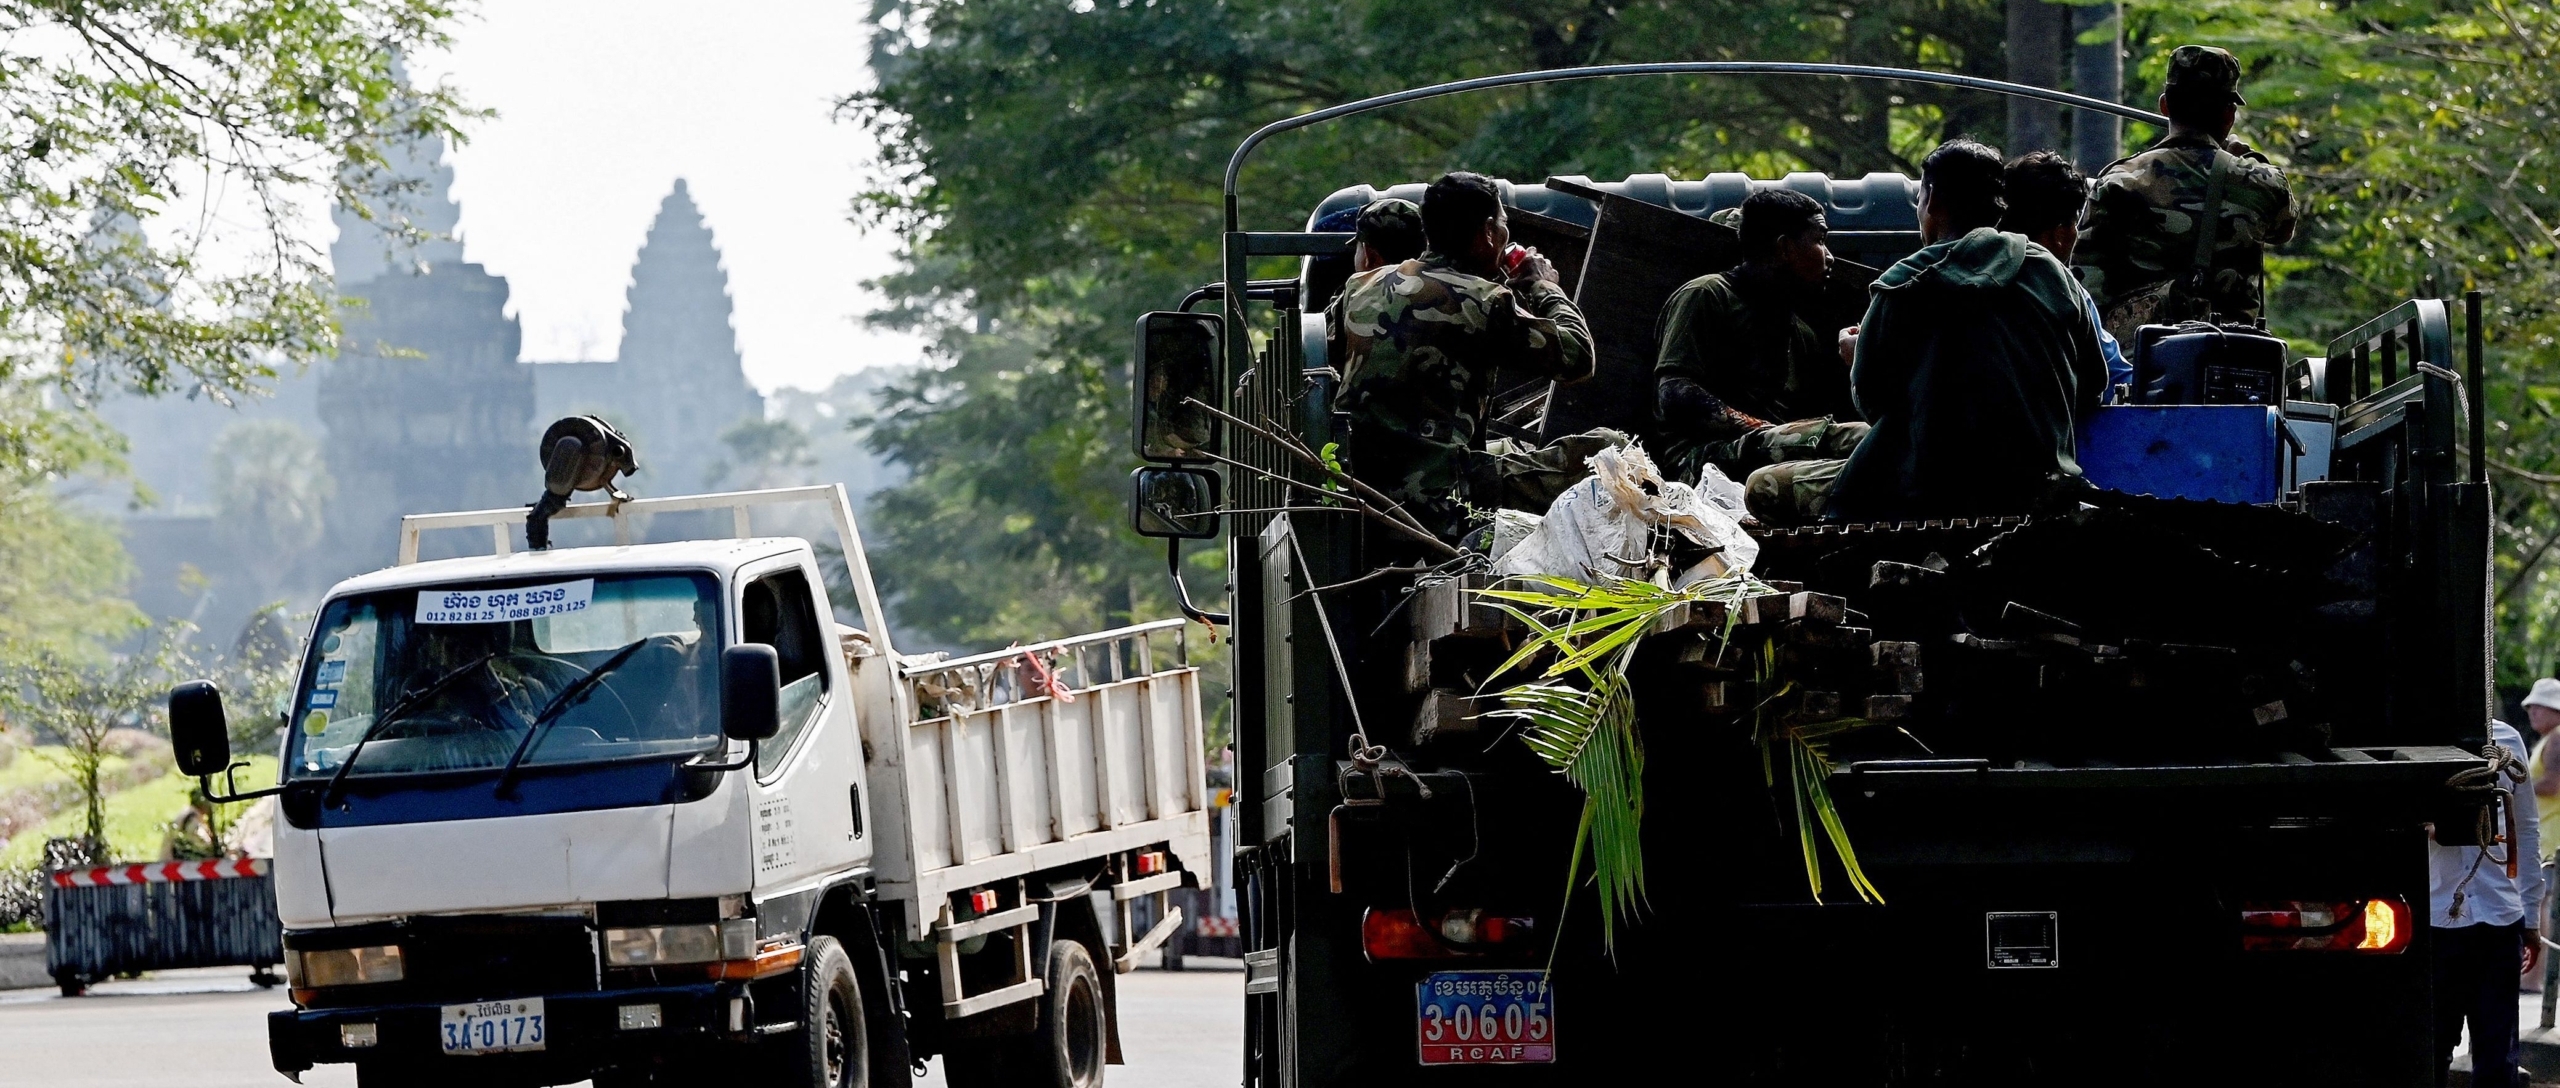 This photo taken on January 18, 2023 shows a military truck transporting the belongings of a resident past the Angkor Wat temple in Siem Reap province. The military was involved in moving residents who volunteered to move from Angkor to the resettlement site of Run Ta Ek. But many residents told Amnesty the moves were not voluntary.